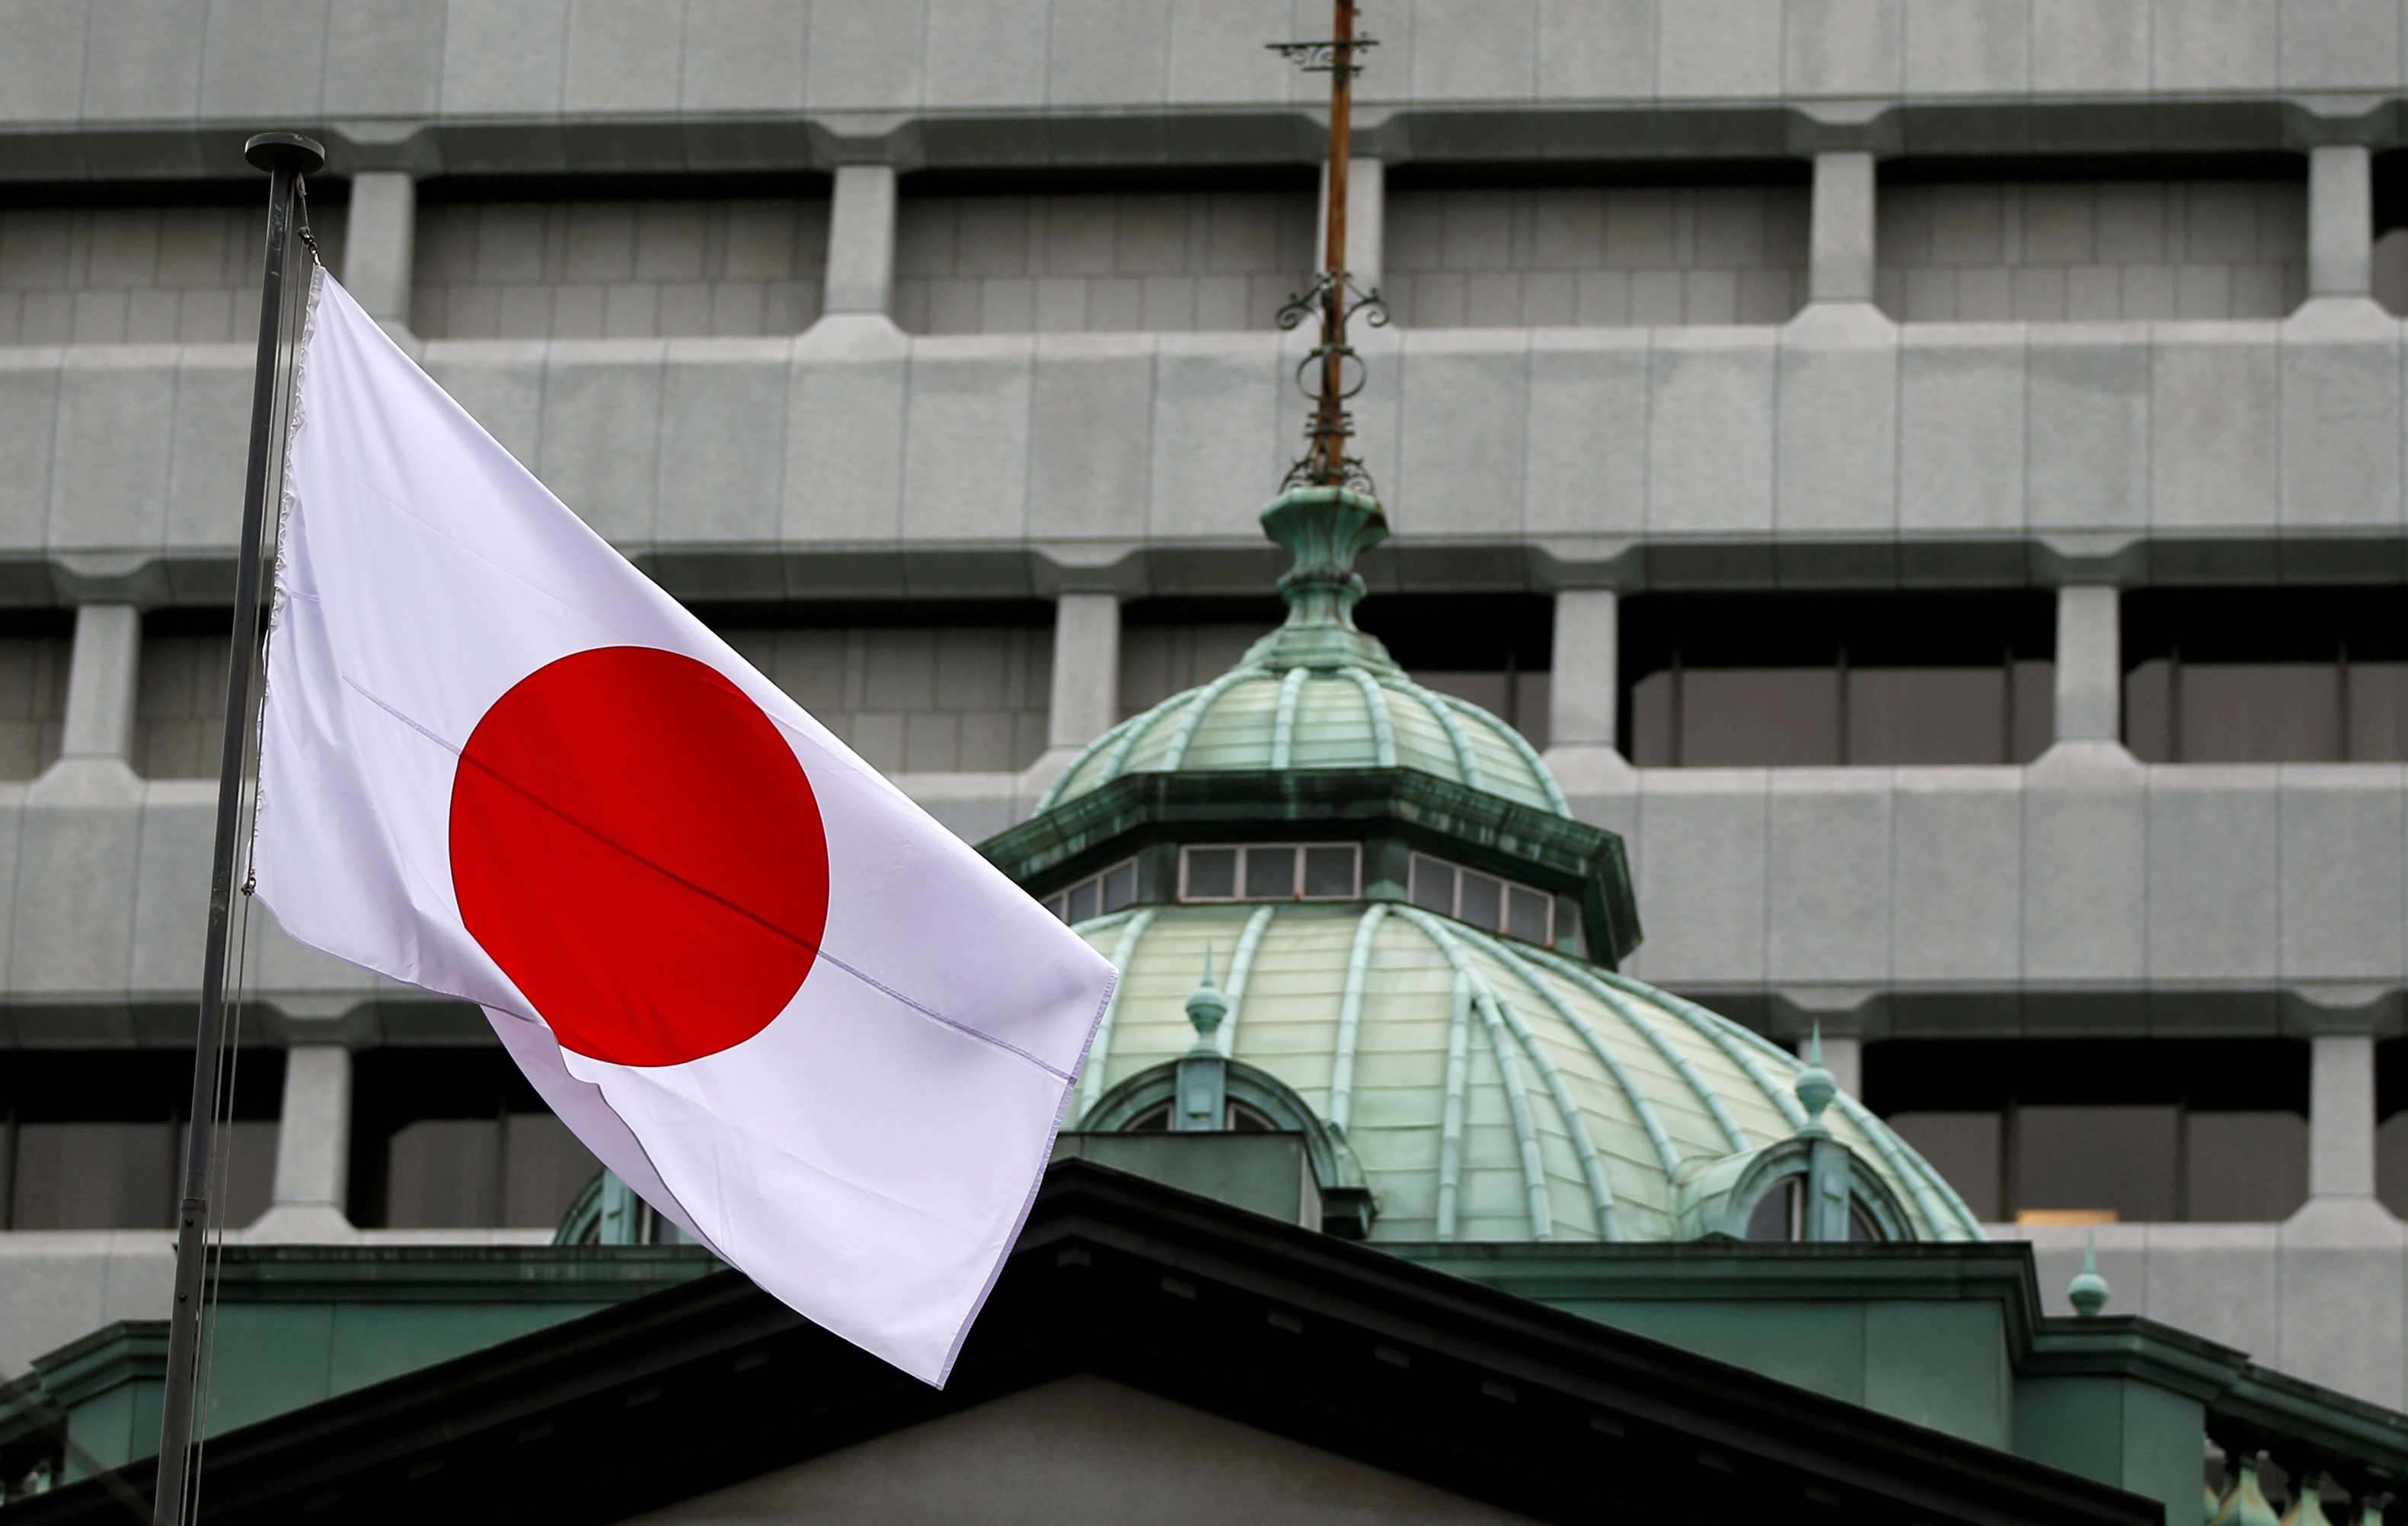 Some reflections on Japanese policy Brookings